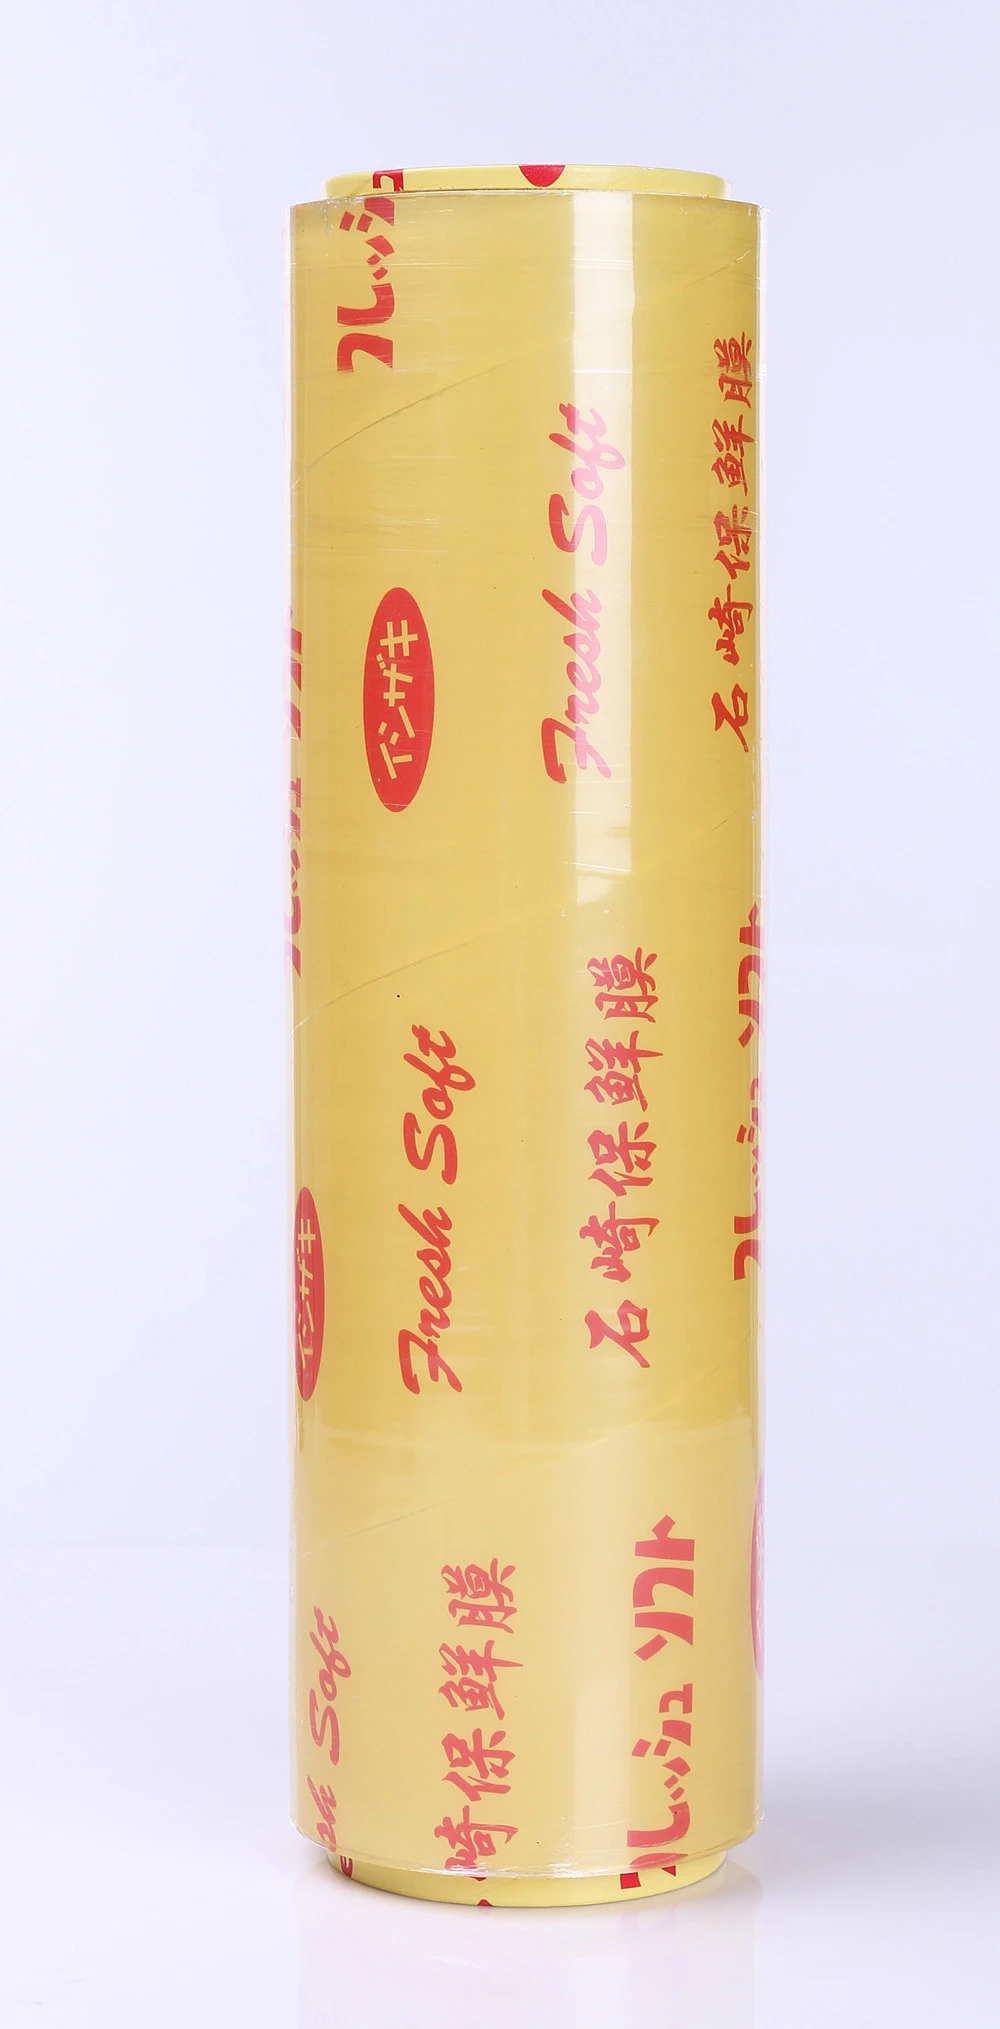 PVC Cling Film for Food Wrap China Industry Top 5 Supplier Food Grade 9~20 micron PVC Cling Film biodegradable plastic wrap